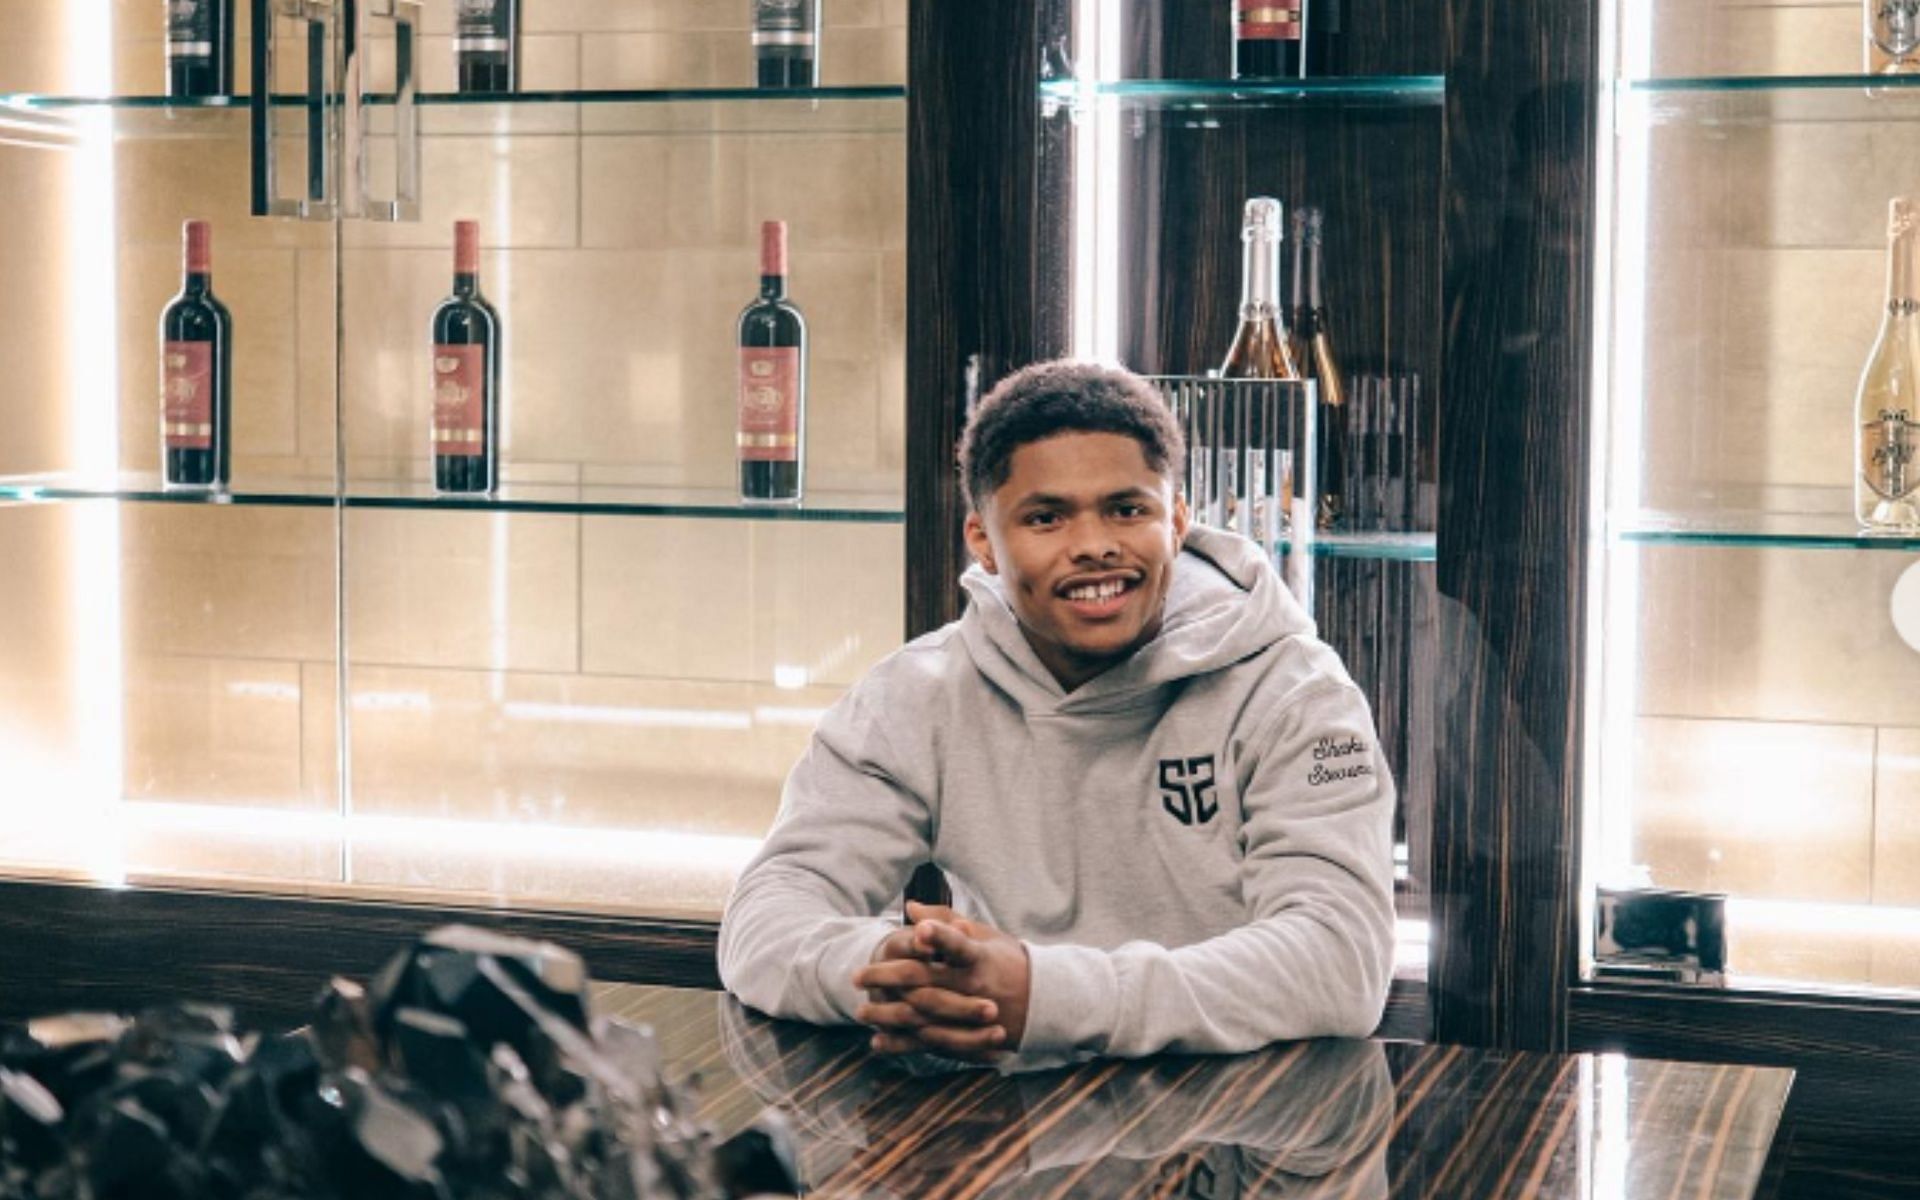 Shakur Stevenson is coming off a win last month.